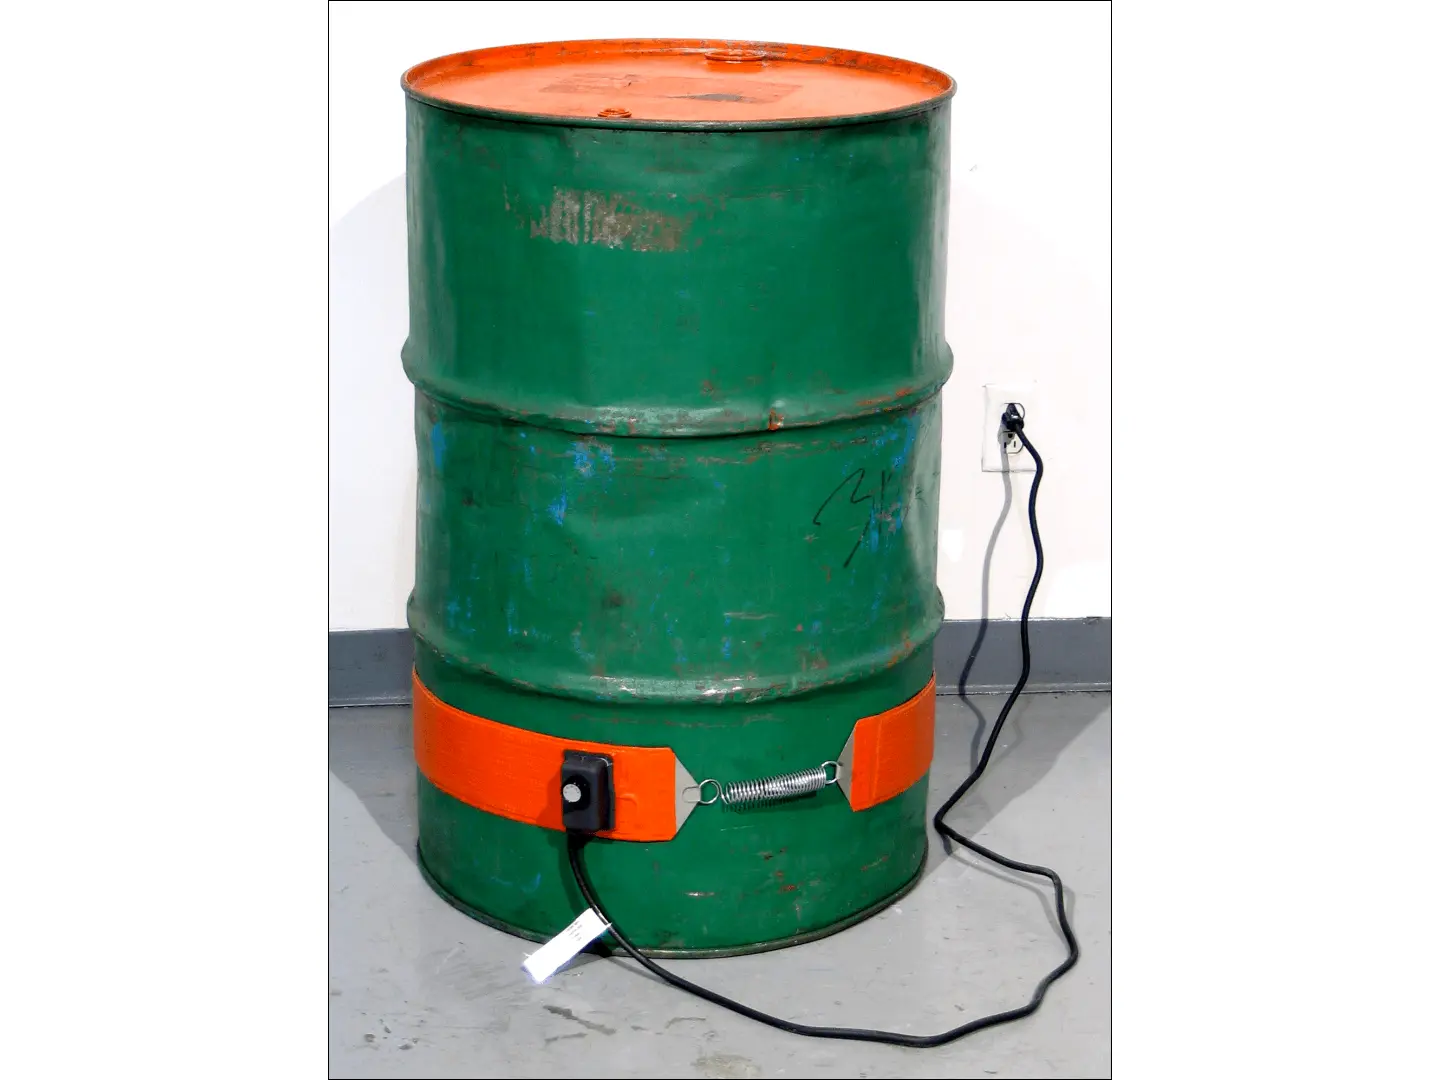 Drum Heater to heat the contents of a metal drum - Model 710-55-115 shown